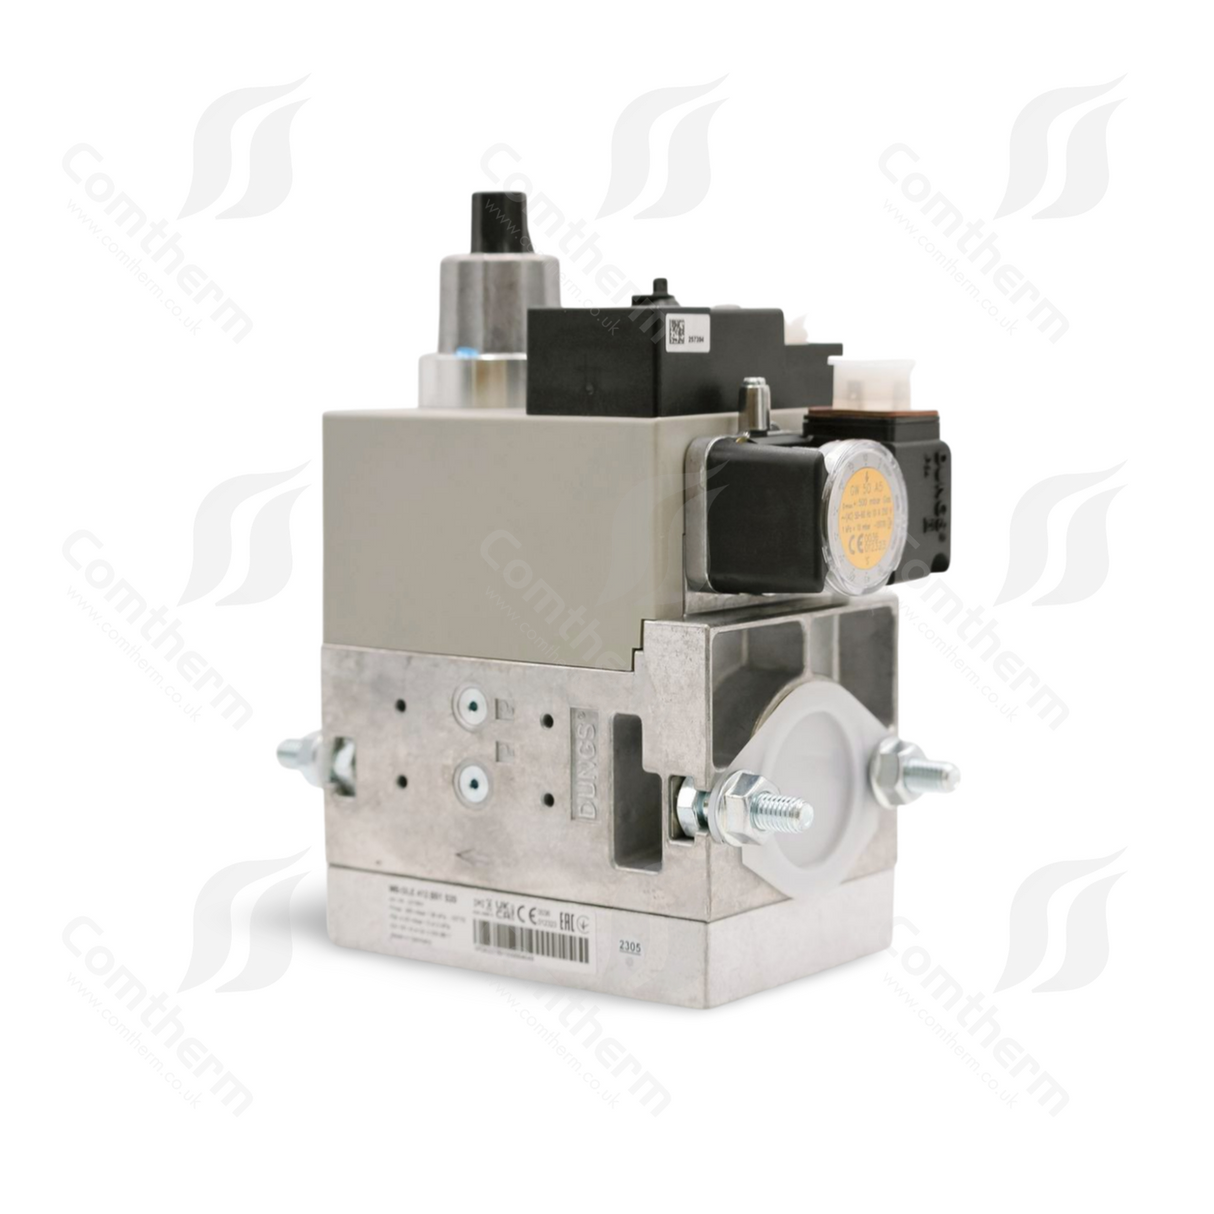 Dungs MB-DLE 412 B01 S52 + GW150A5 Multibloc Gas Valve - 110v